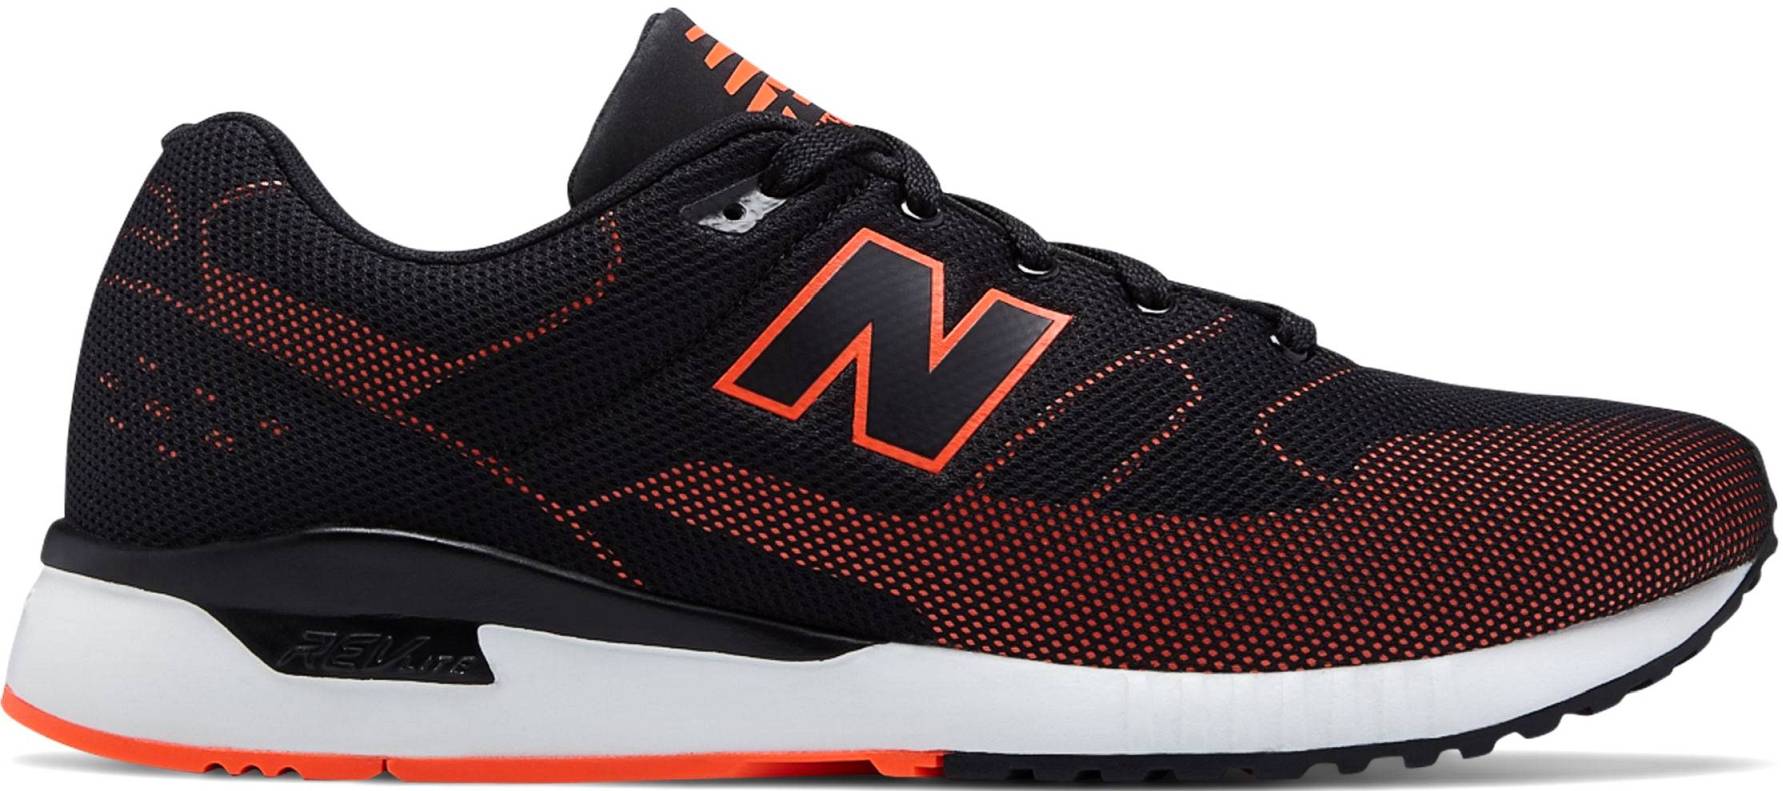 New Balance 530 Re-Engineered – Shoes 